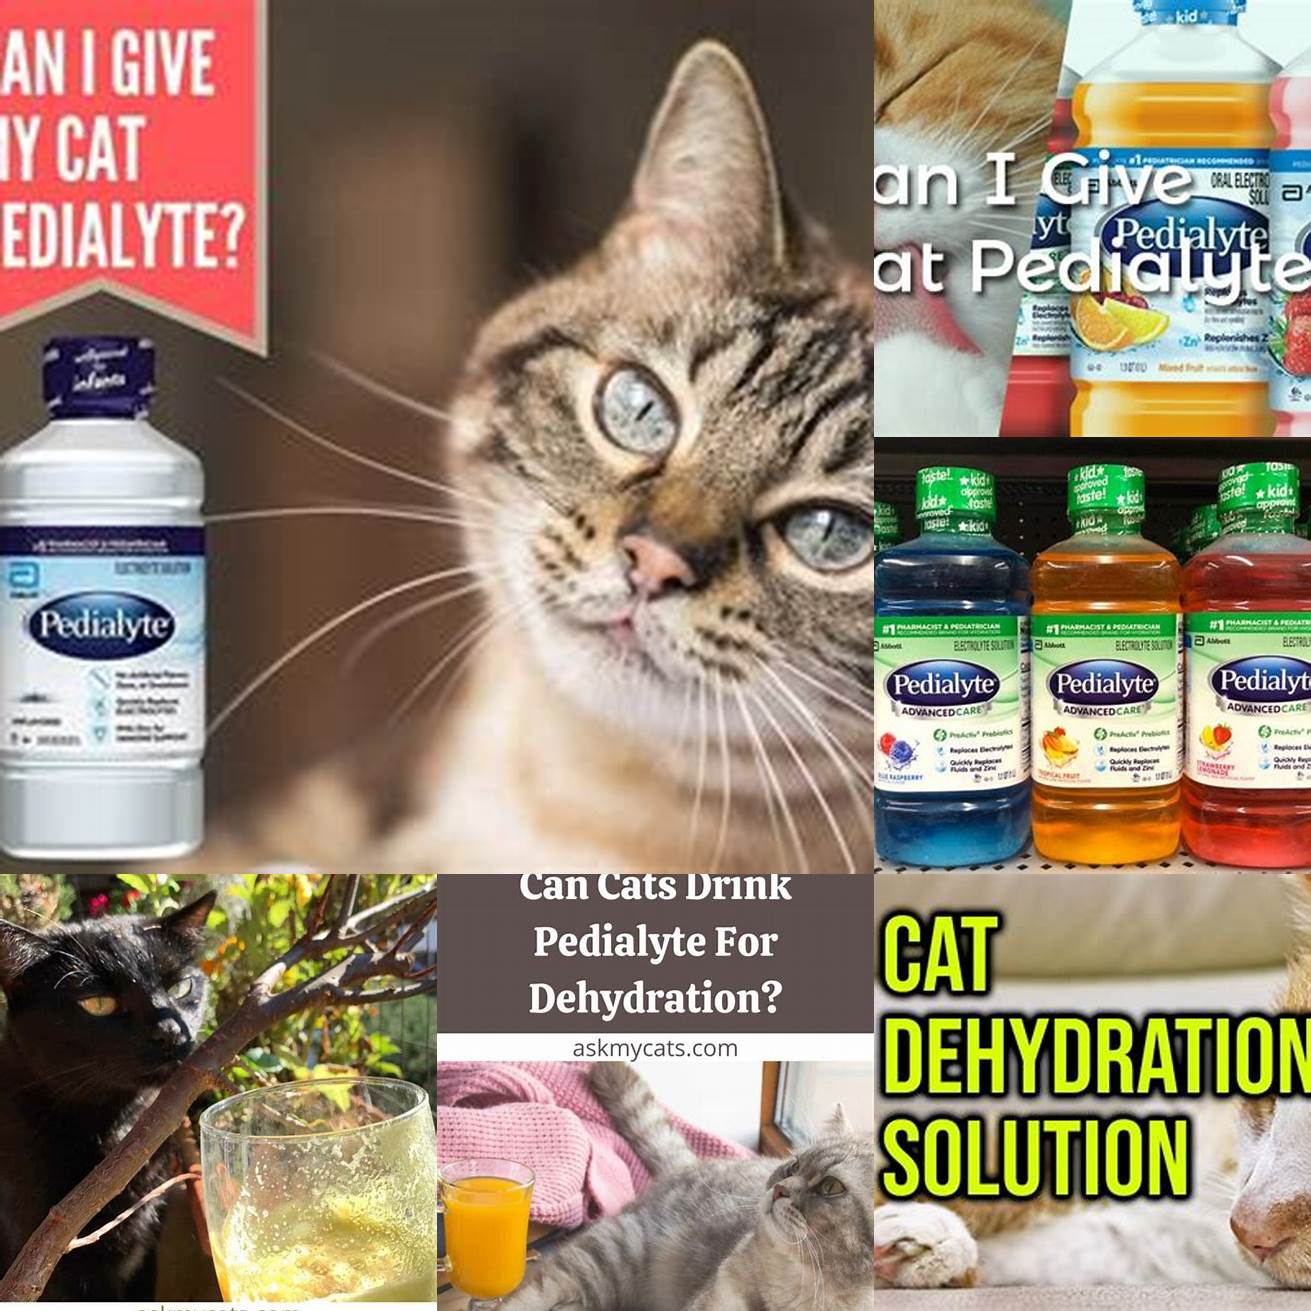 Q Can I give my cat Pedialyte for dehydration